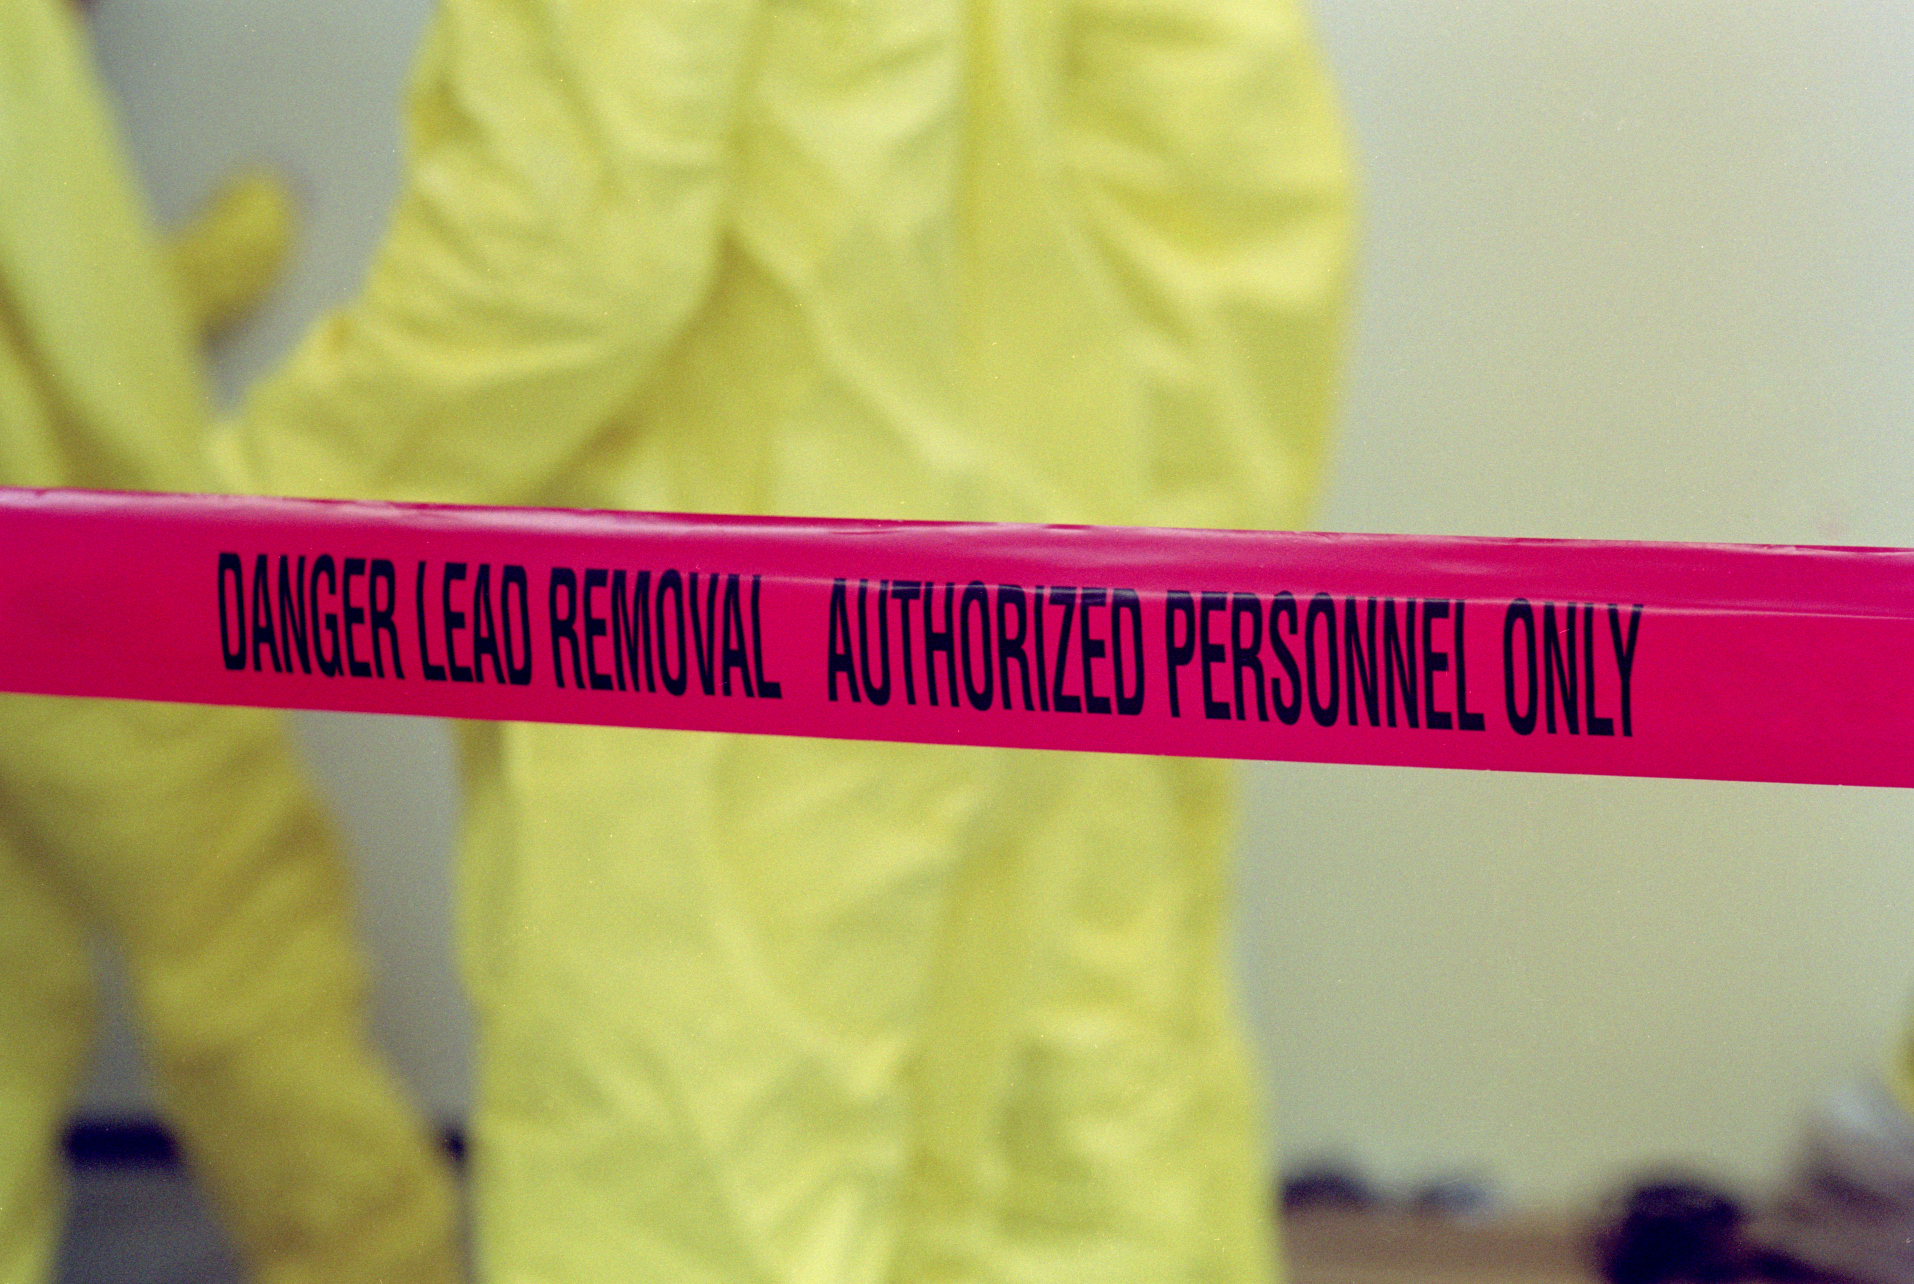 Caution tape reading danger lead removal